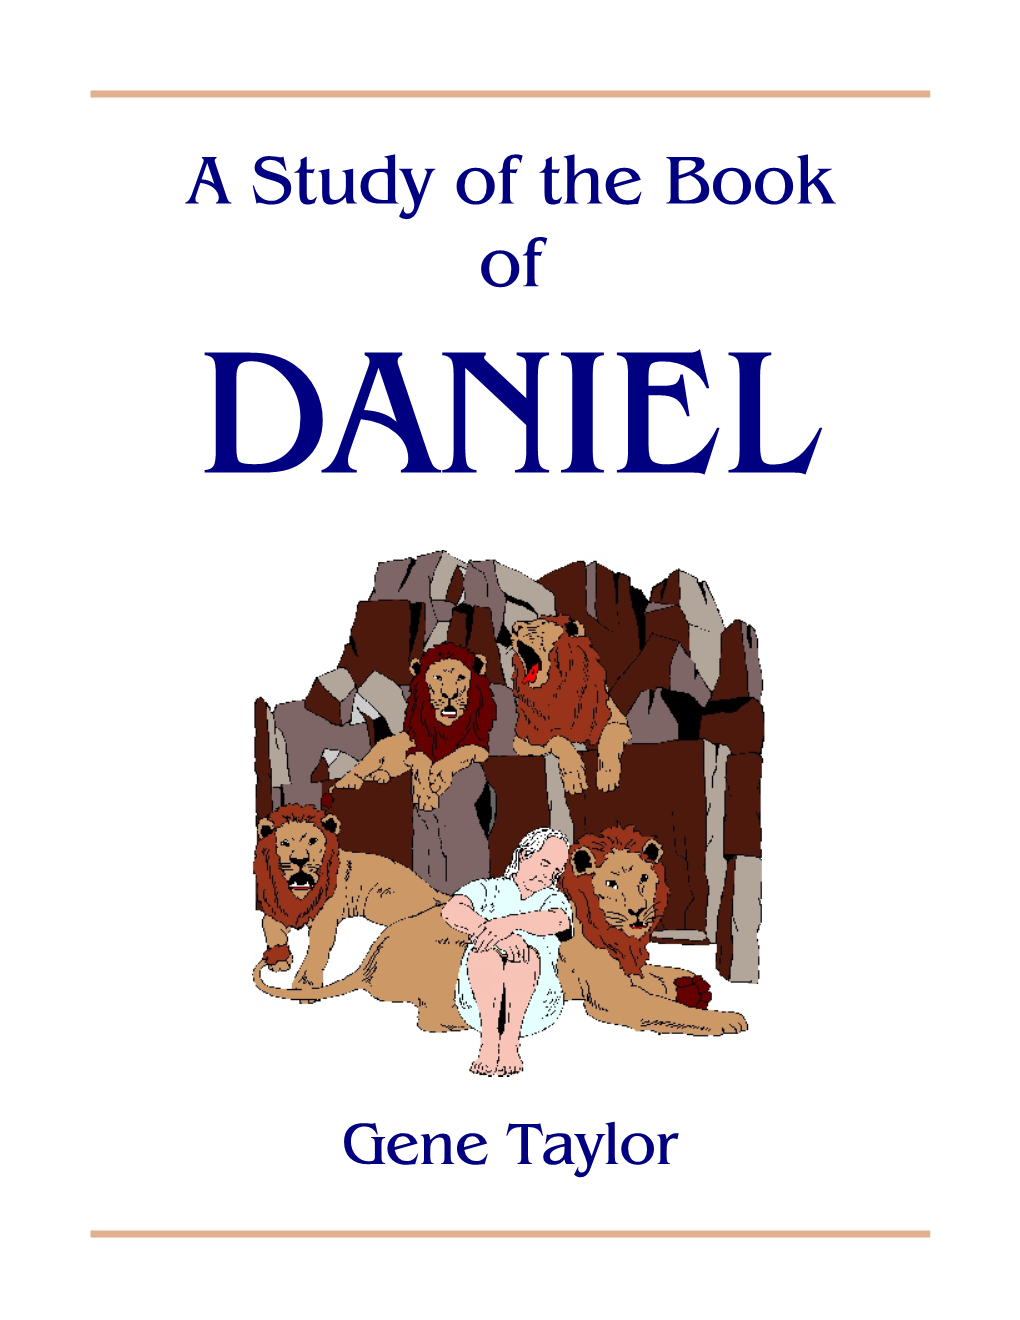 A Study of the Book of DANIEL